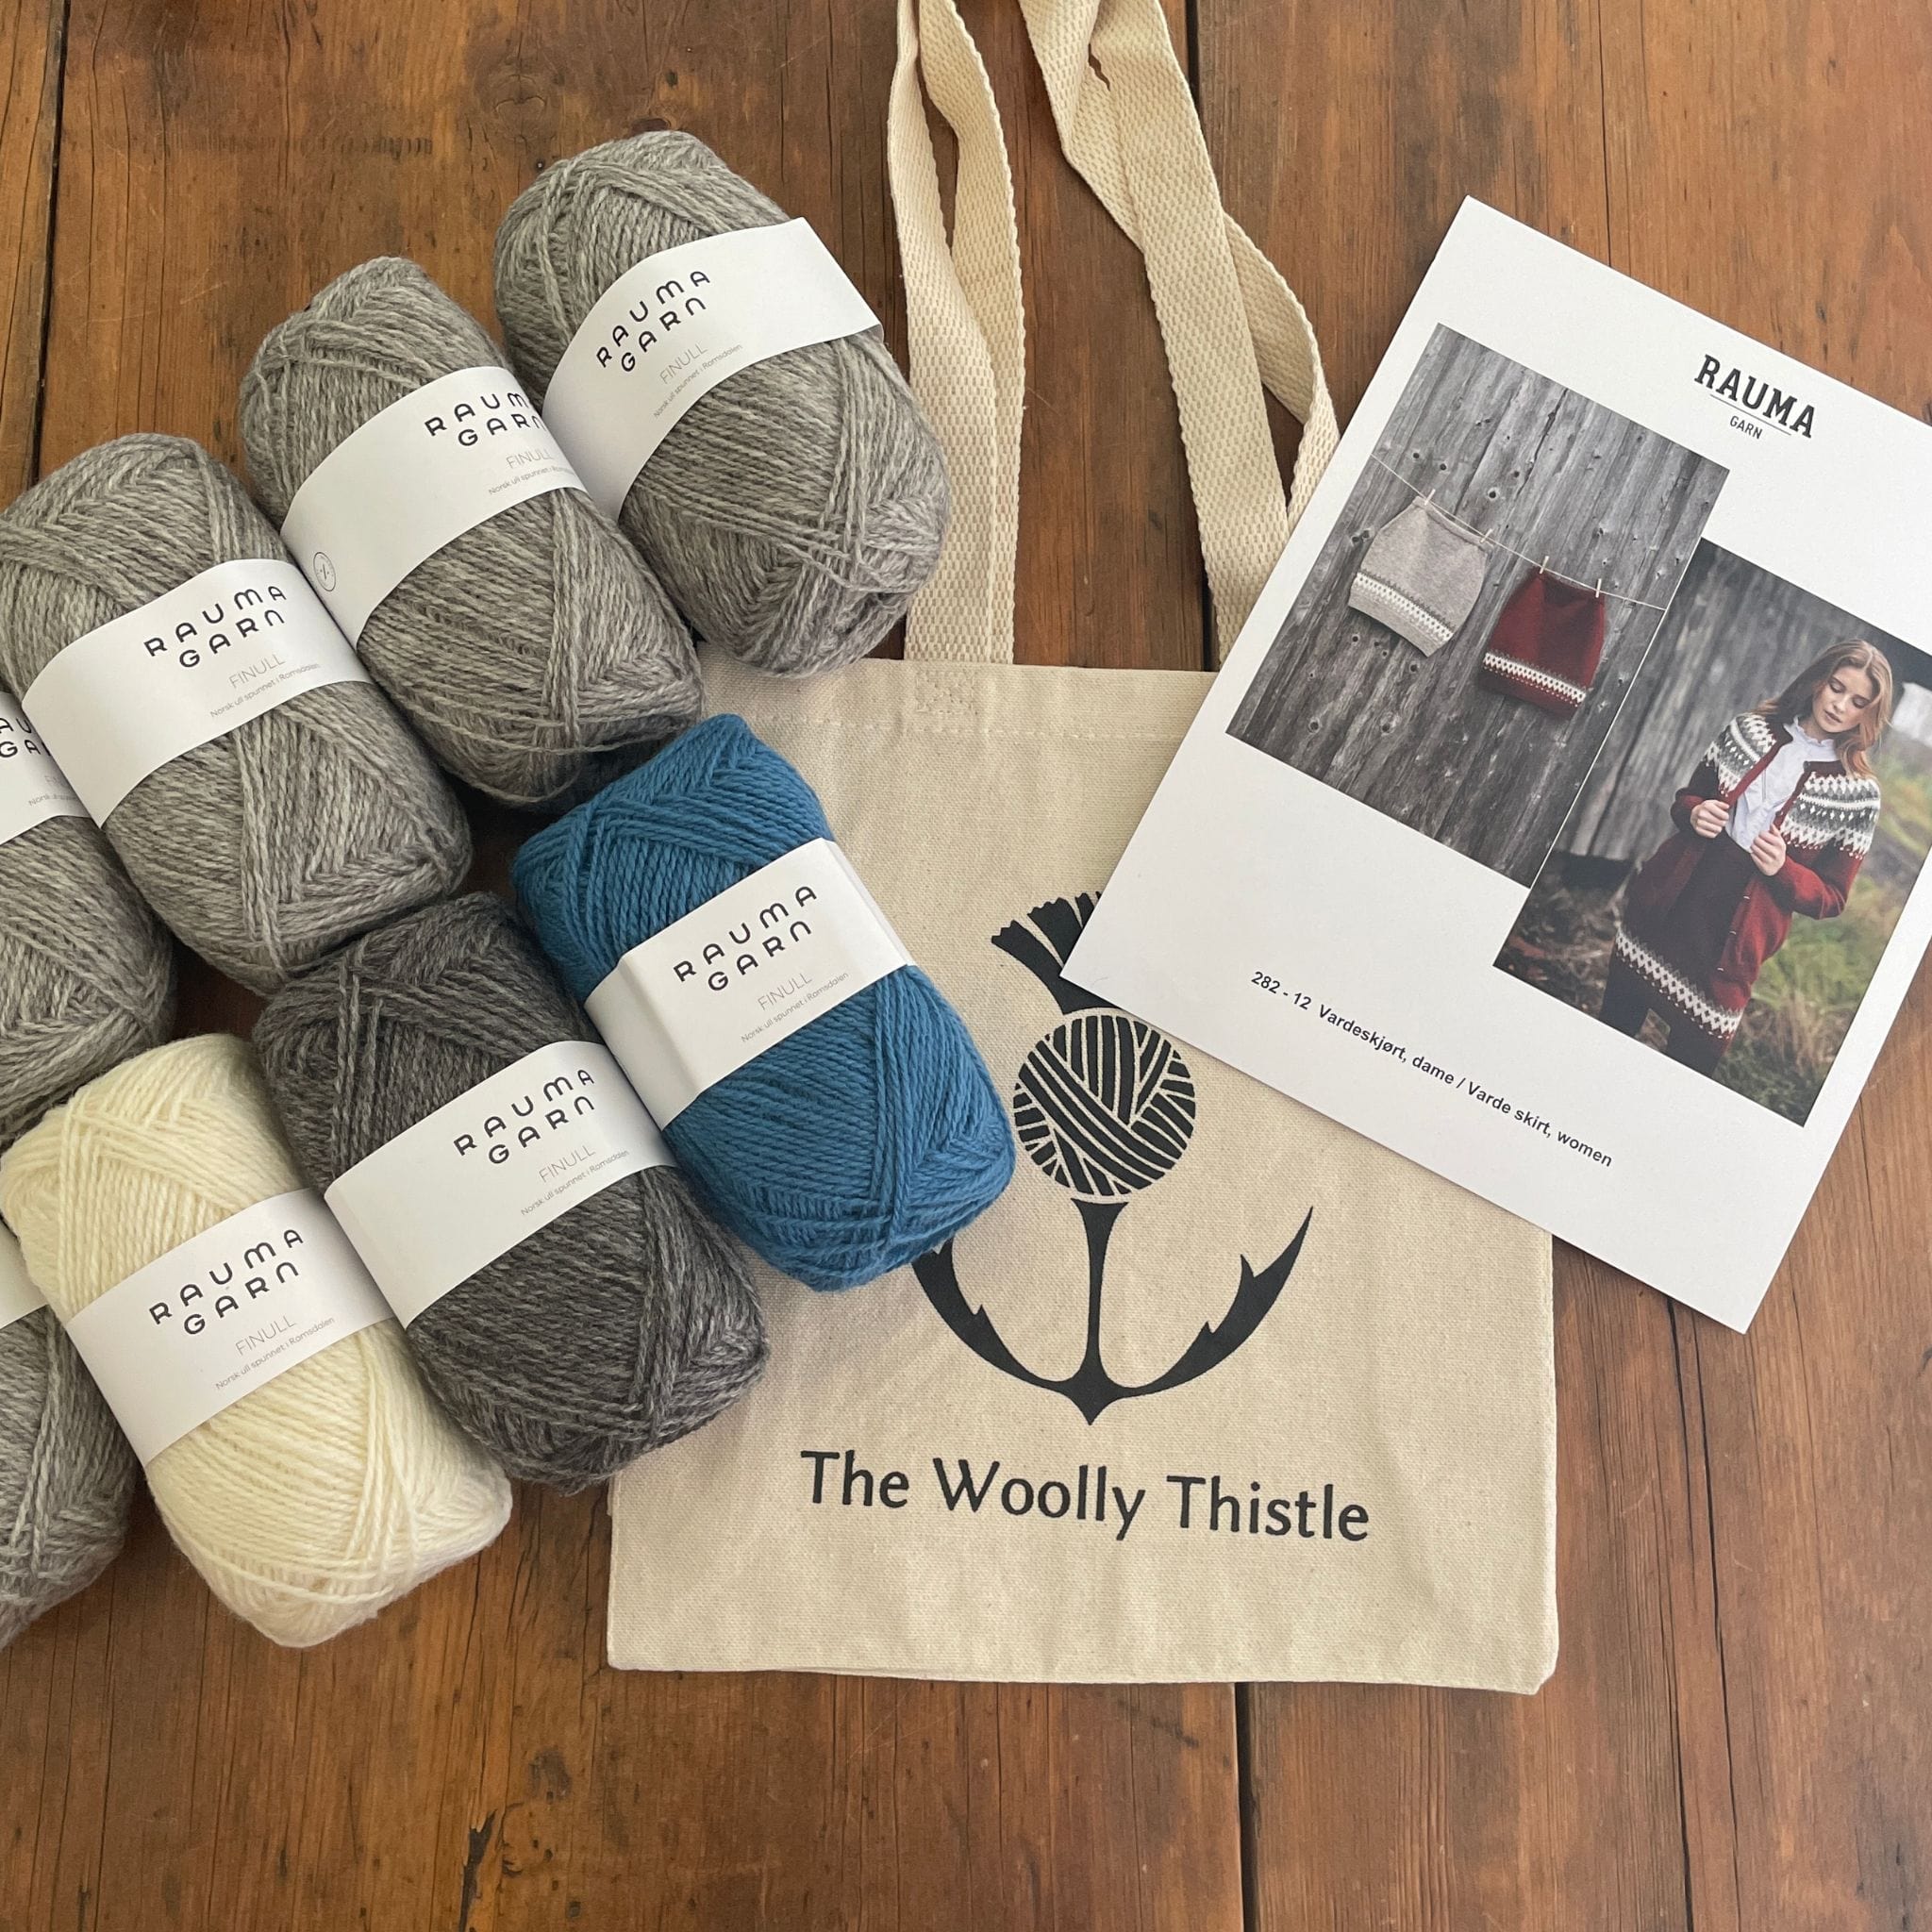 Components of the Varde Skirt Kit including pattern card, TWT Tote, and Rauma Finullgarn yarn in greys and blue.